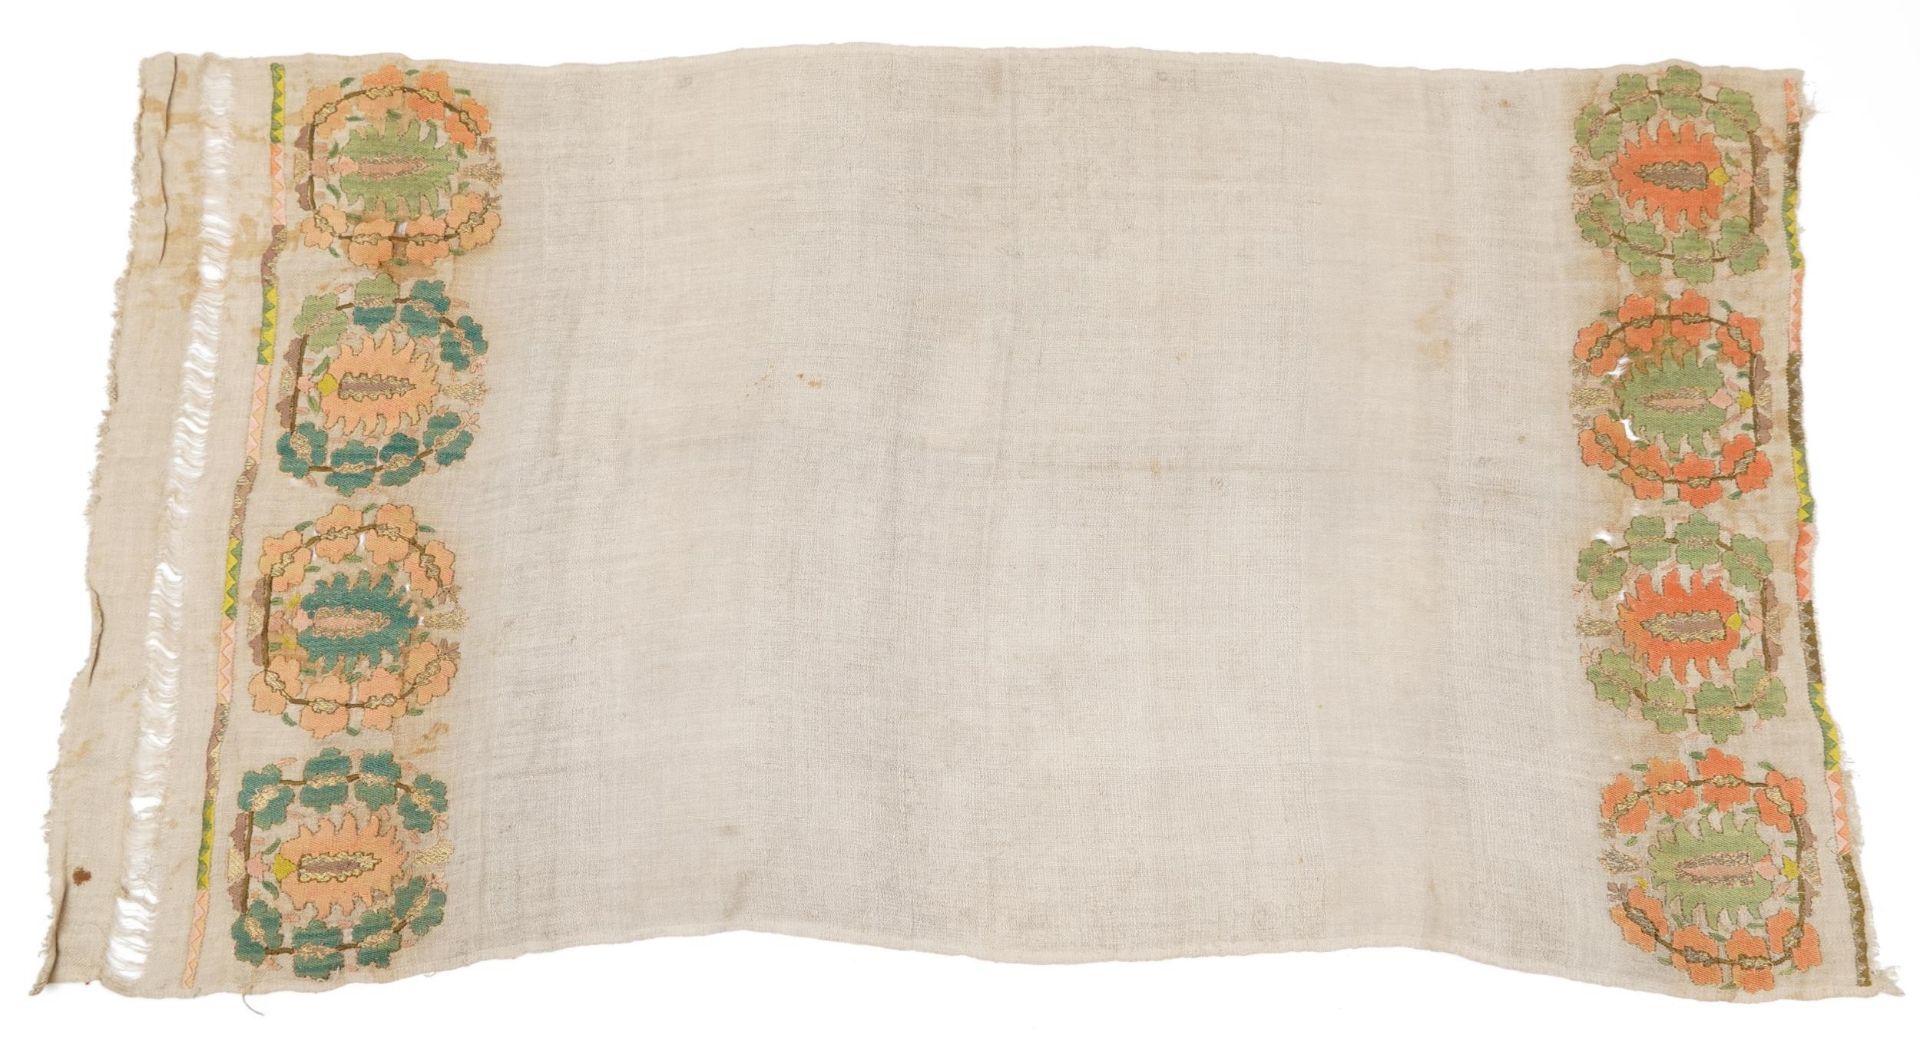 Turkish Ottoman Yaghk cotton and silk textile embroidered with flowers, 130cm x 66cm - Image 12 of 12